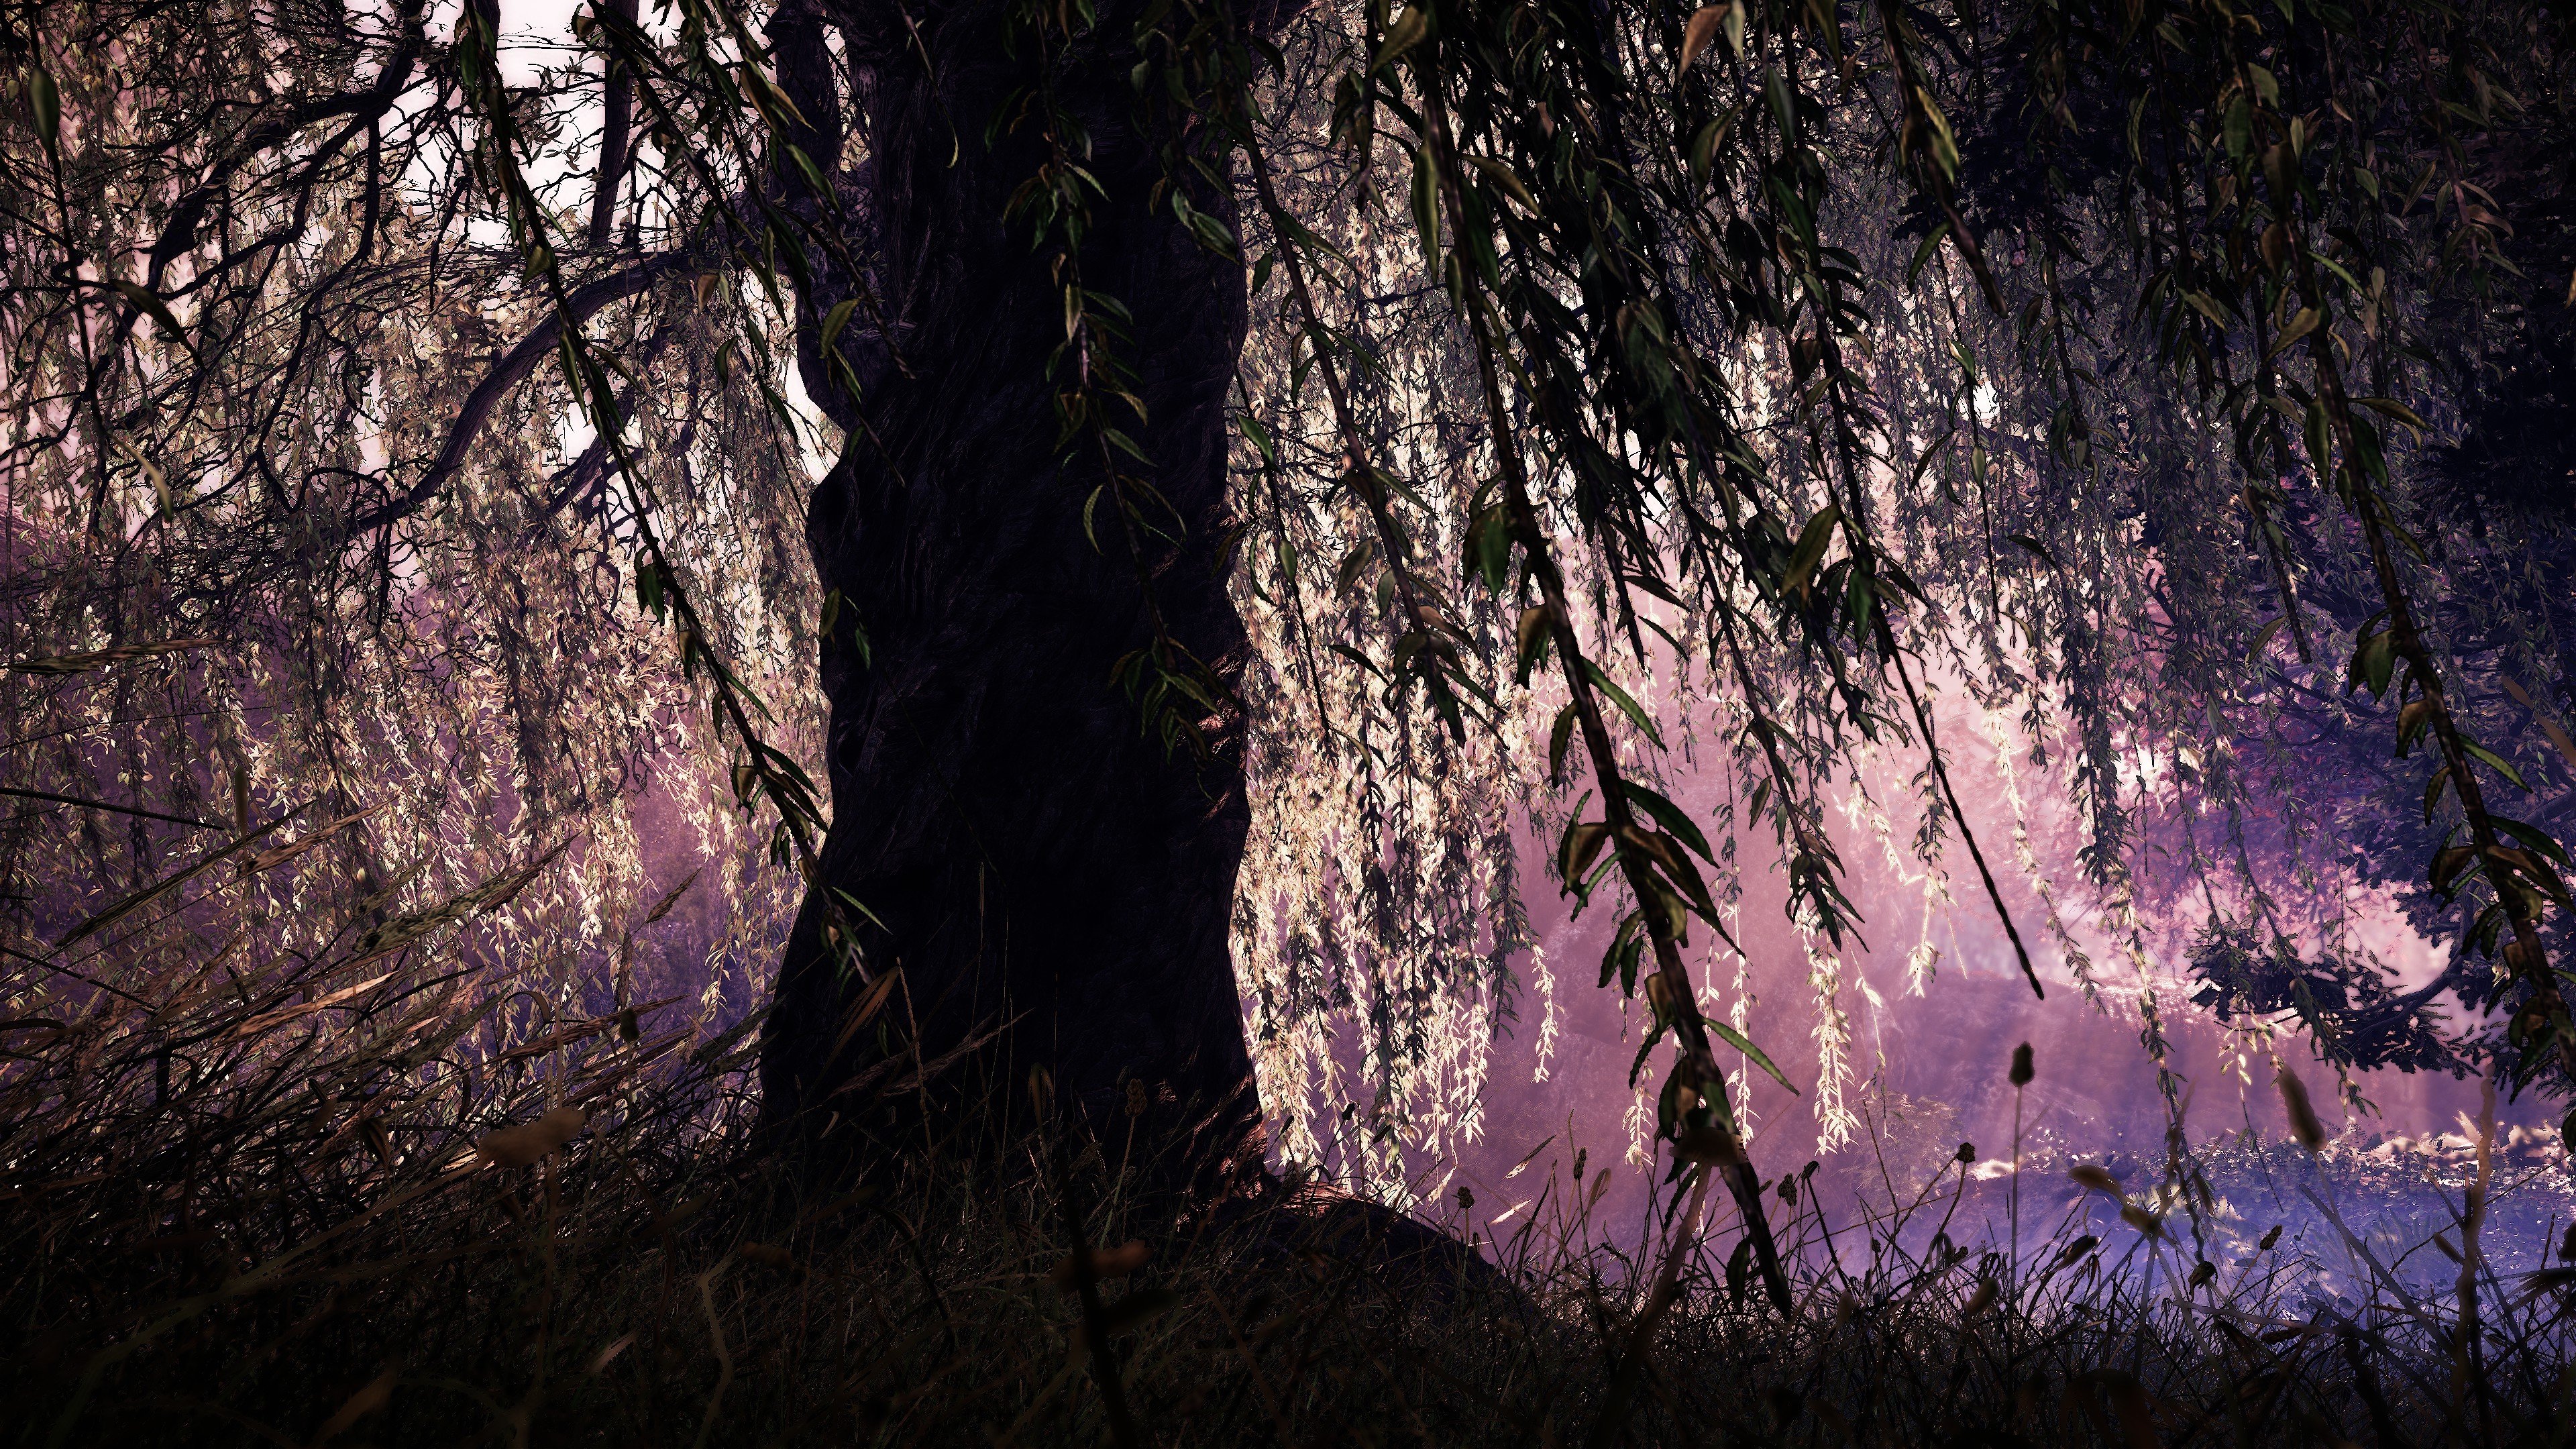 willow trees, Weeping willow, Willows, Plants, Shadow Warrior 2, Calm, Wind, Relaxing Wallpaper